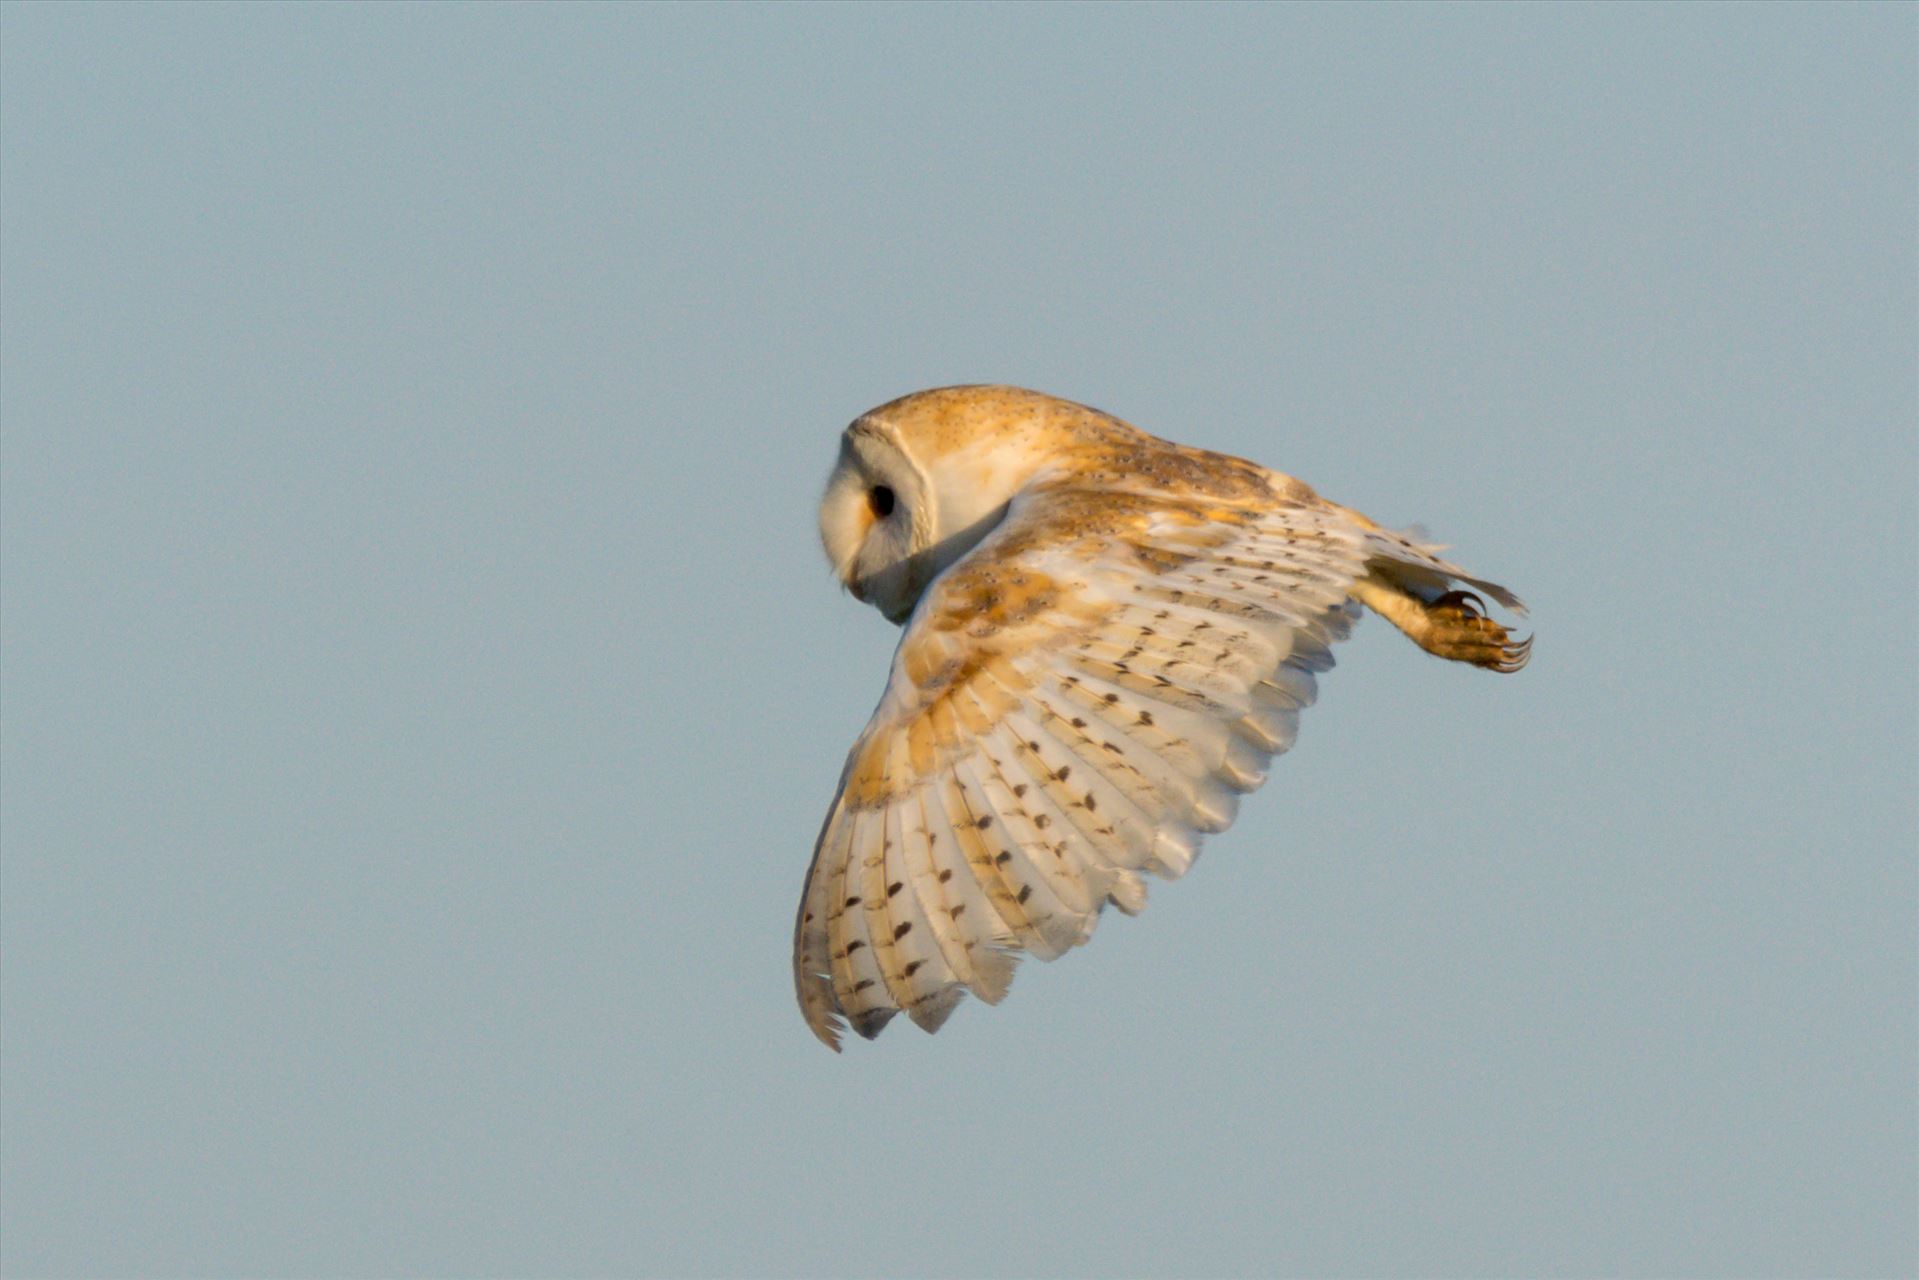 Barn Owl on the hunt 05 - A Barn Owl on the hunt for its breakfast by AJ Stoves Photography